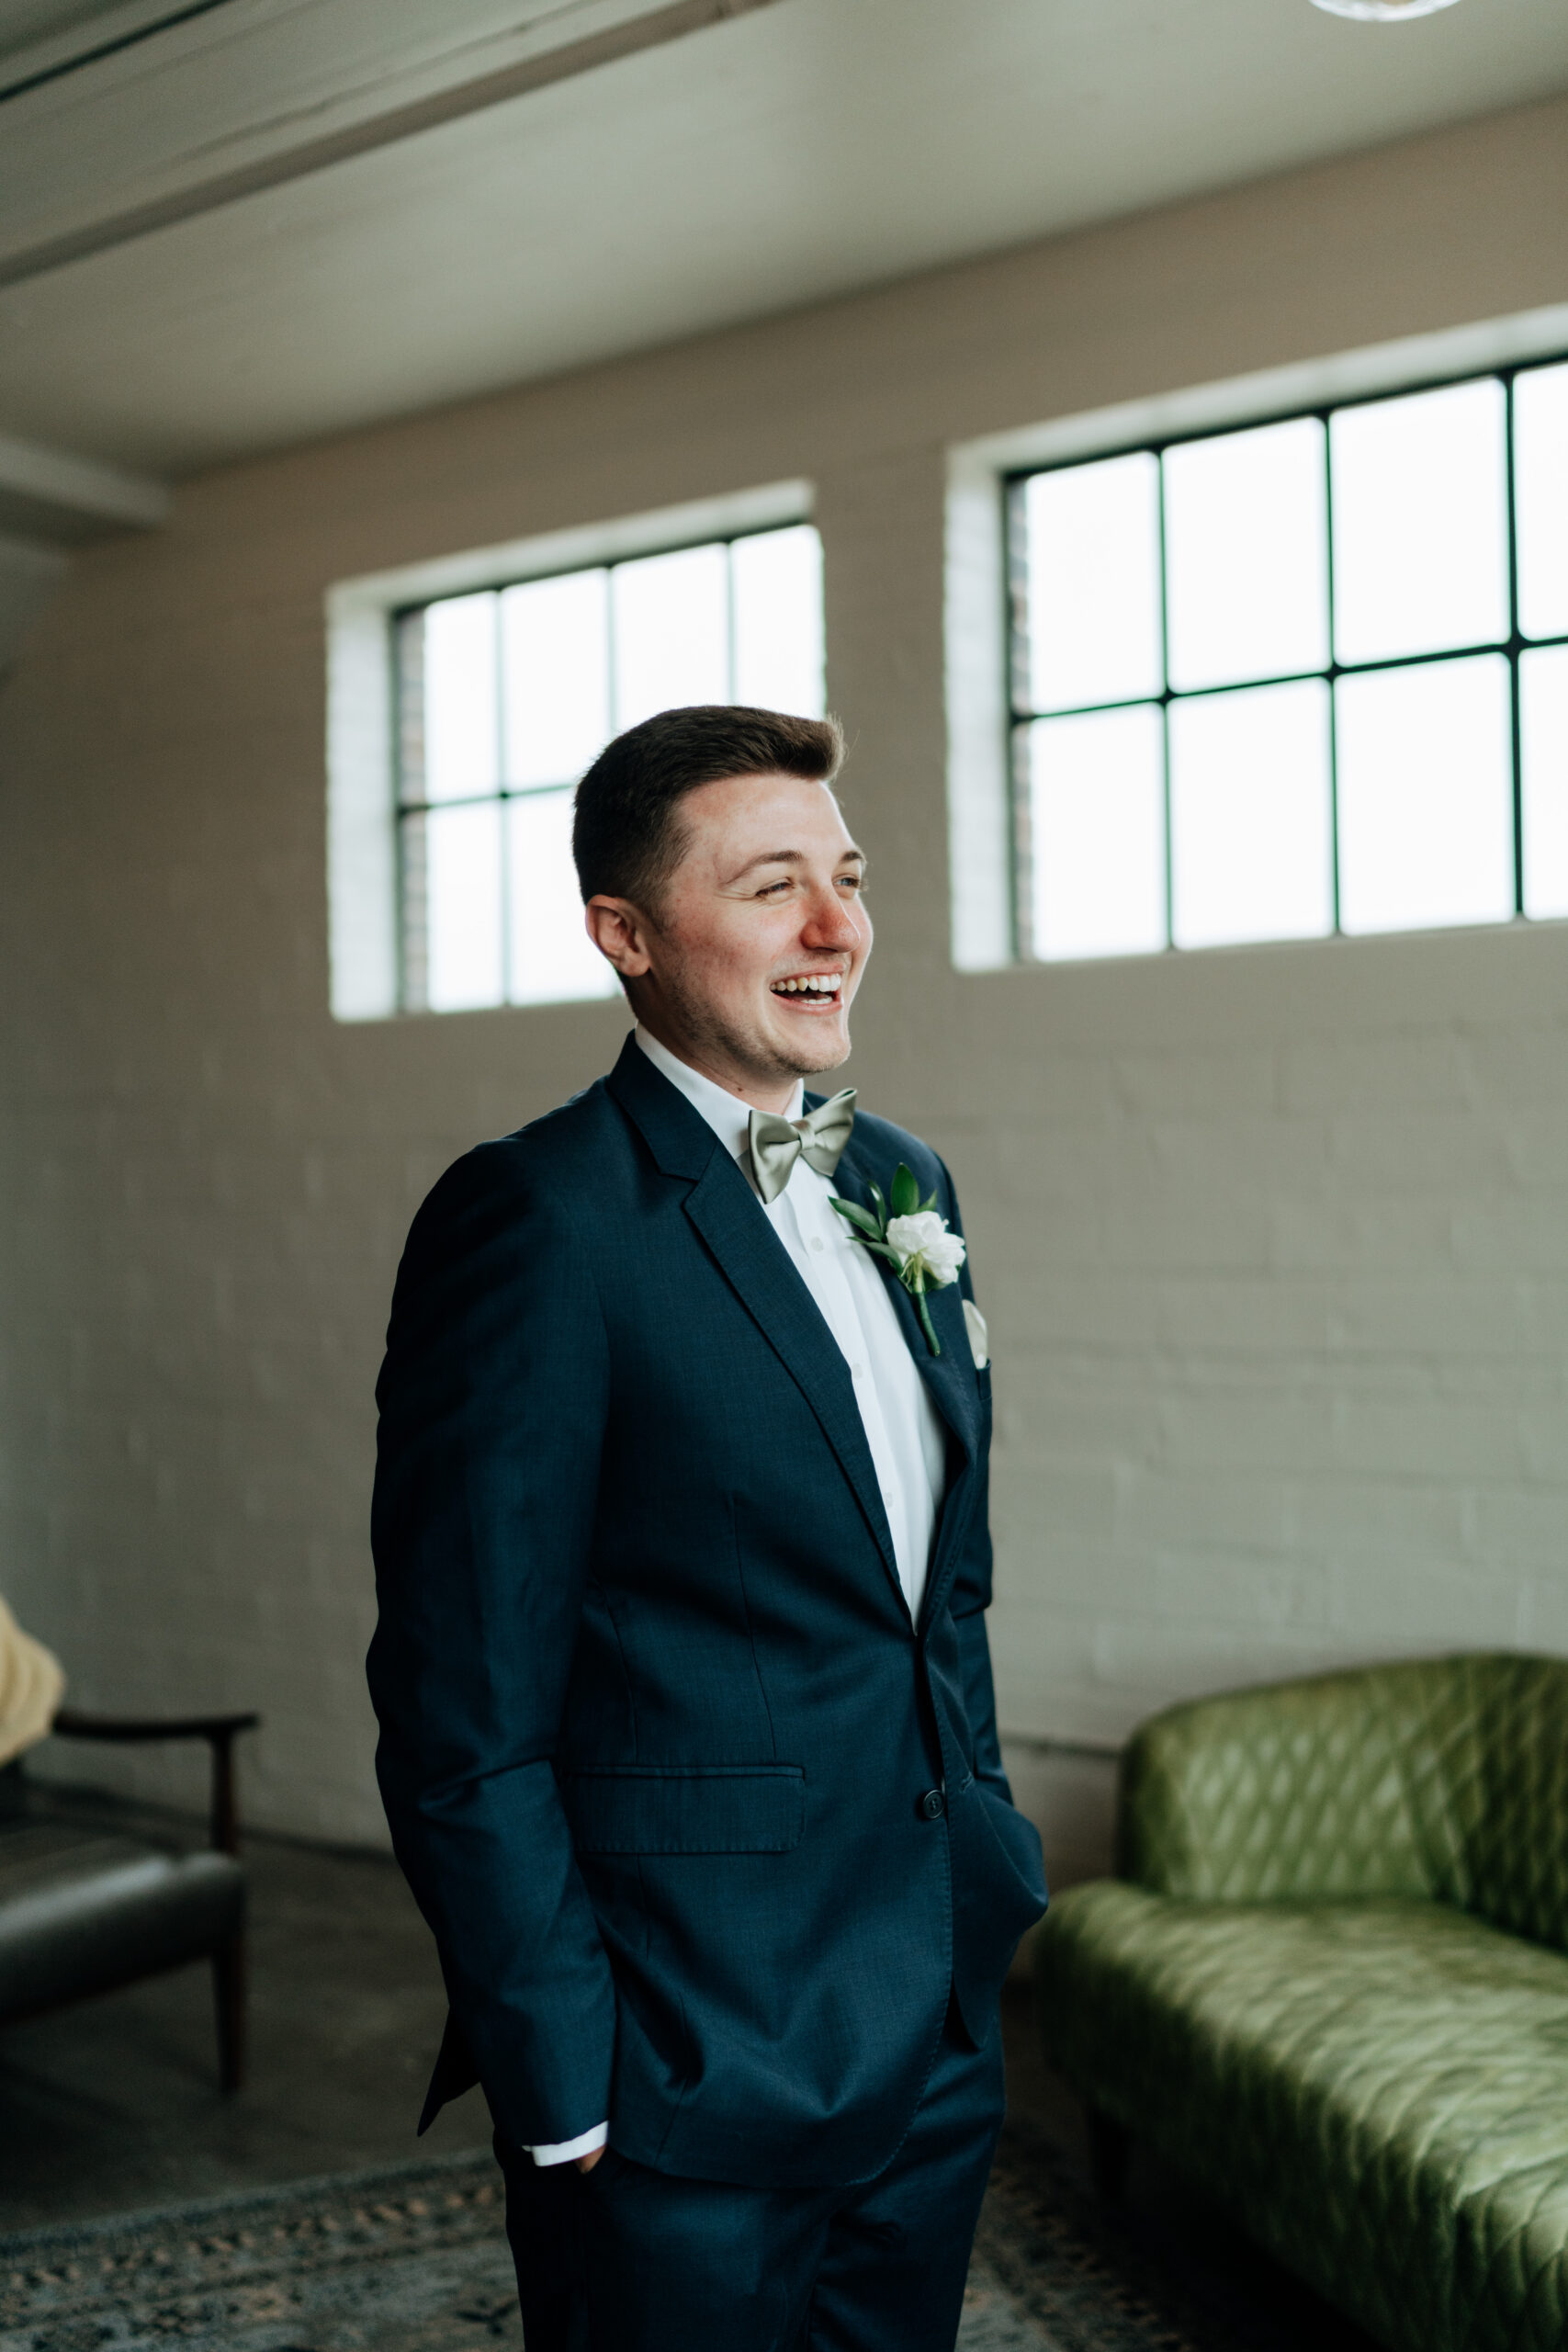 This is a picture of a groom smiling on his wedding day